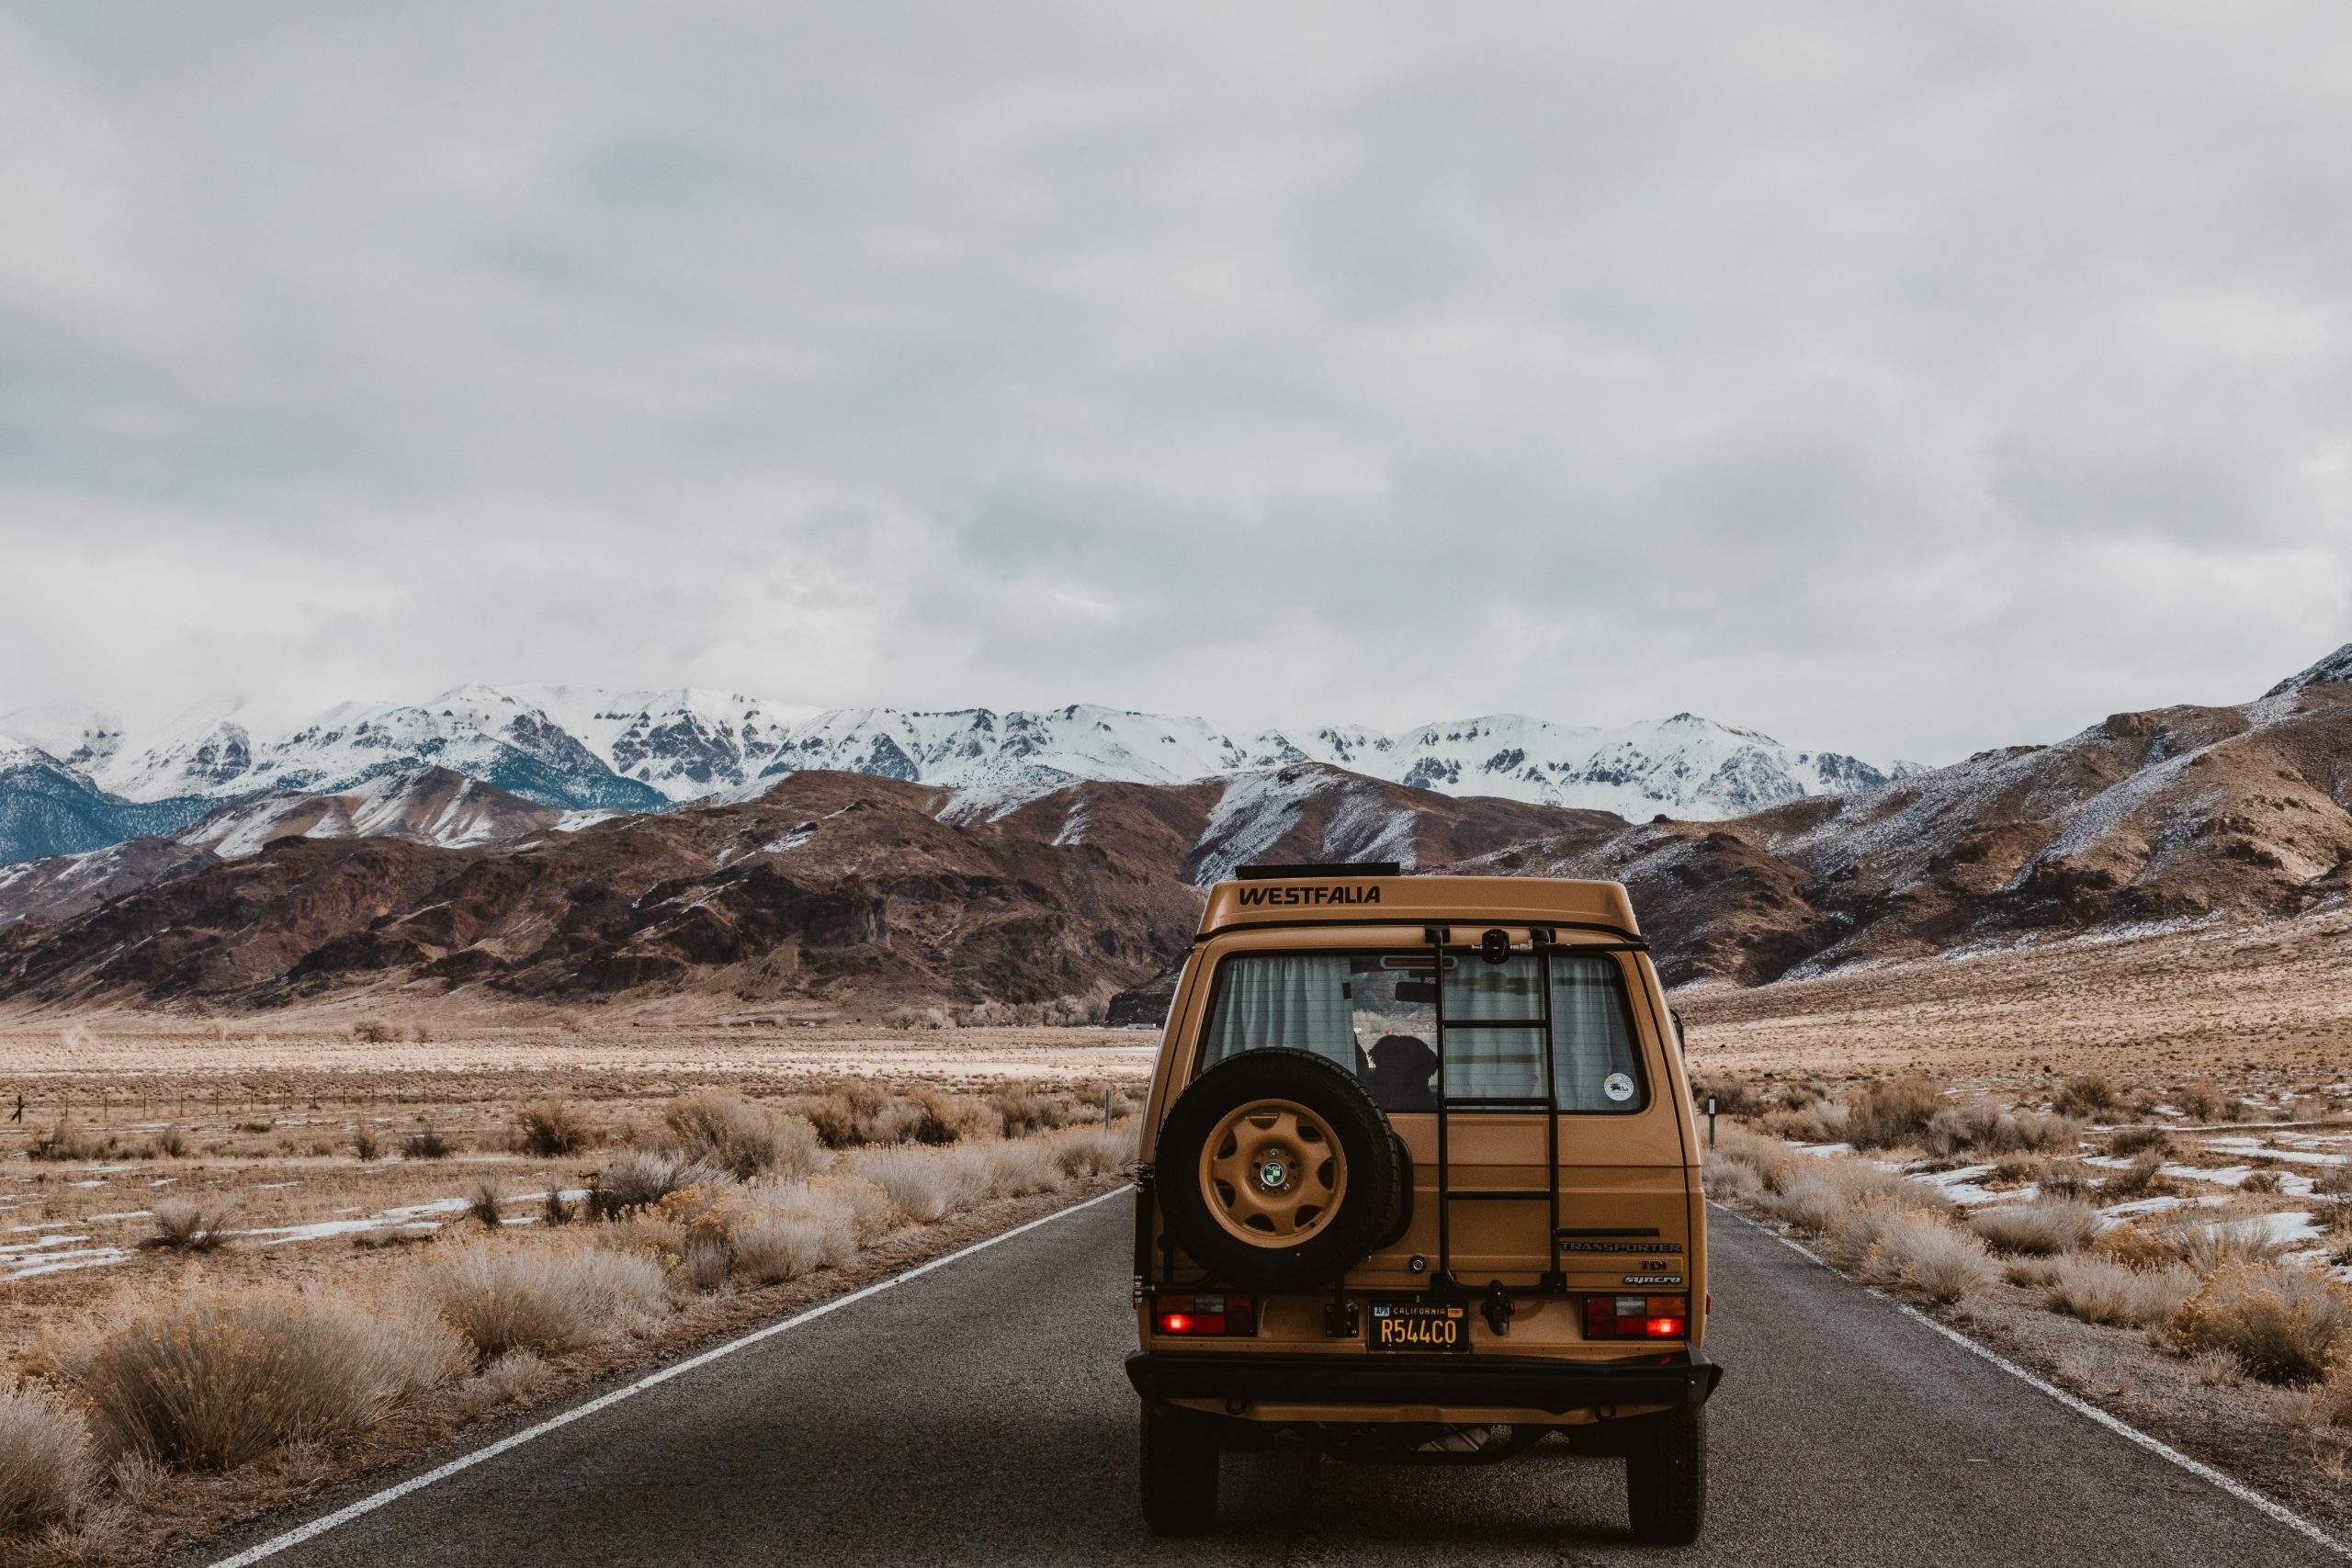 The Best Road Trips From Salt Lake City – A Four Day Trip Itinerary